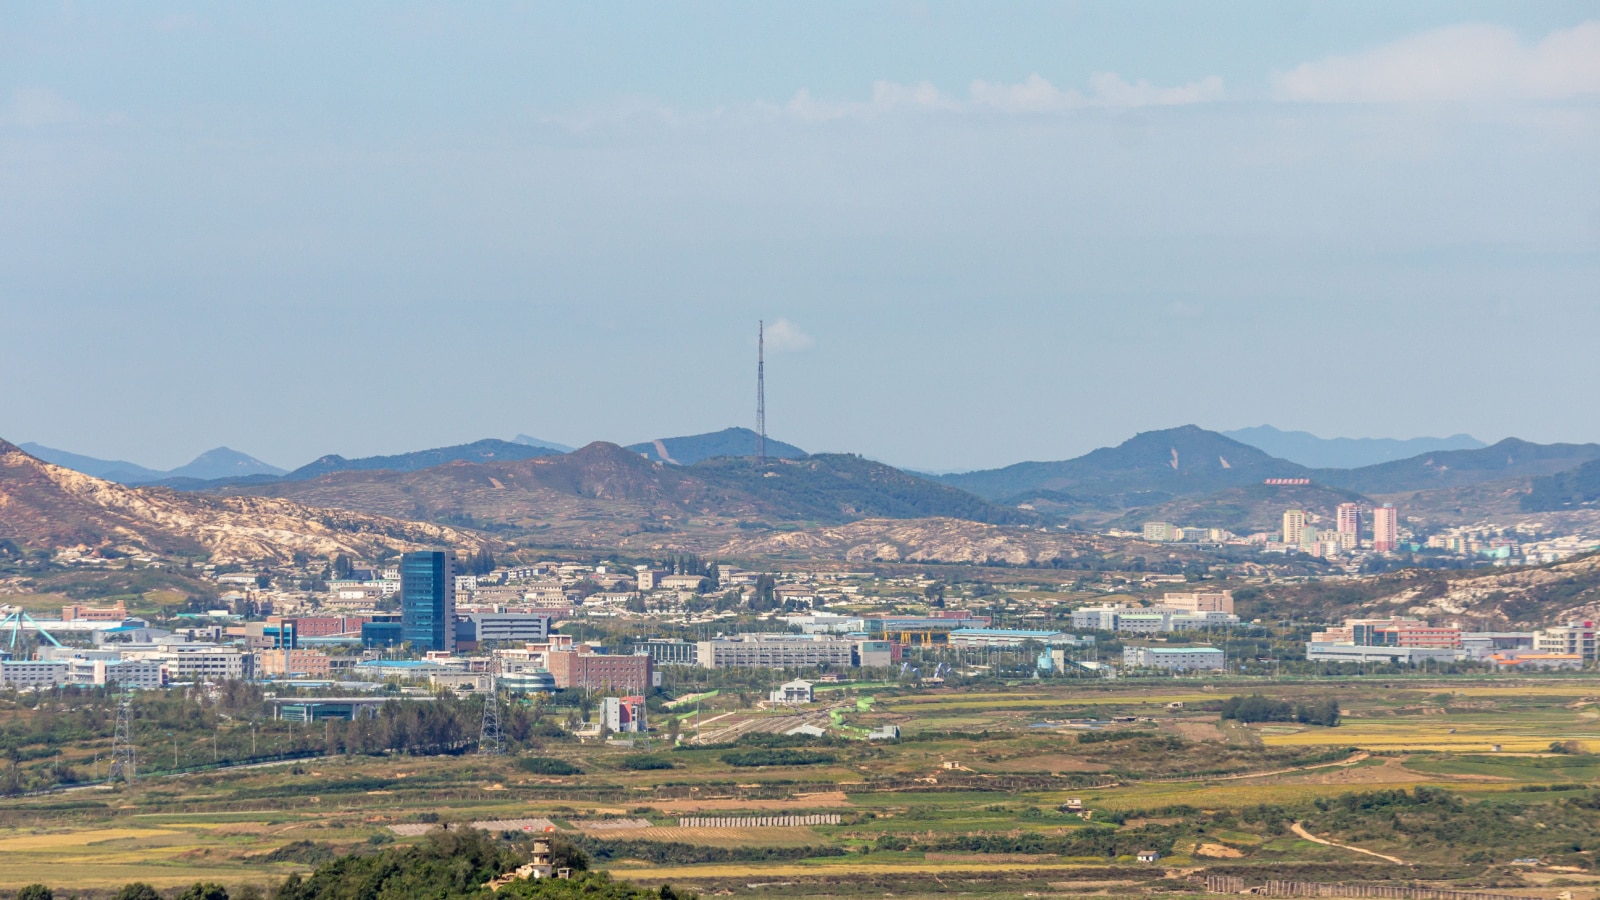 Kaesong, North Korea September 25, 2018: A view of the Kaesong Industrial Complex, North Korea from the Dora Observatory, South Korea